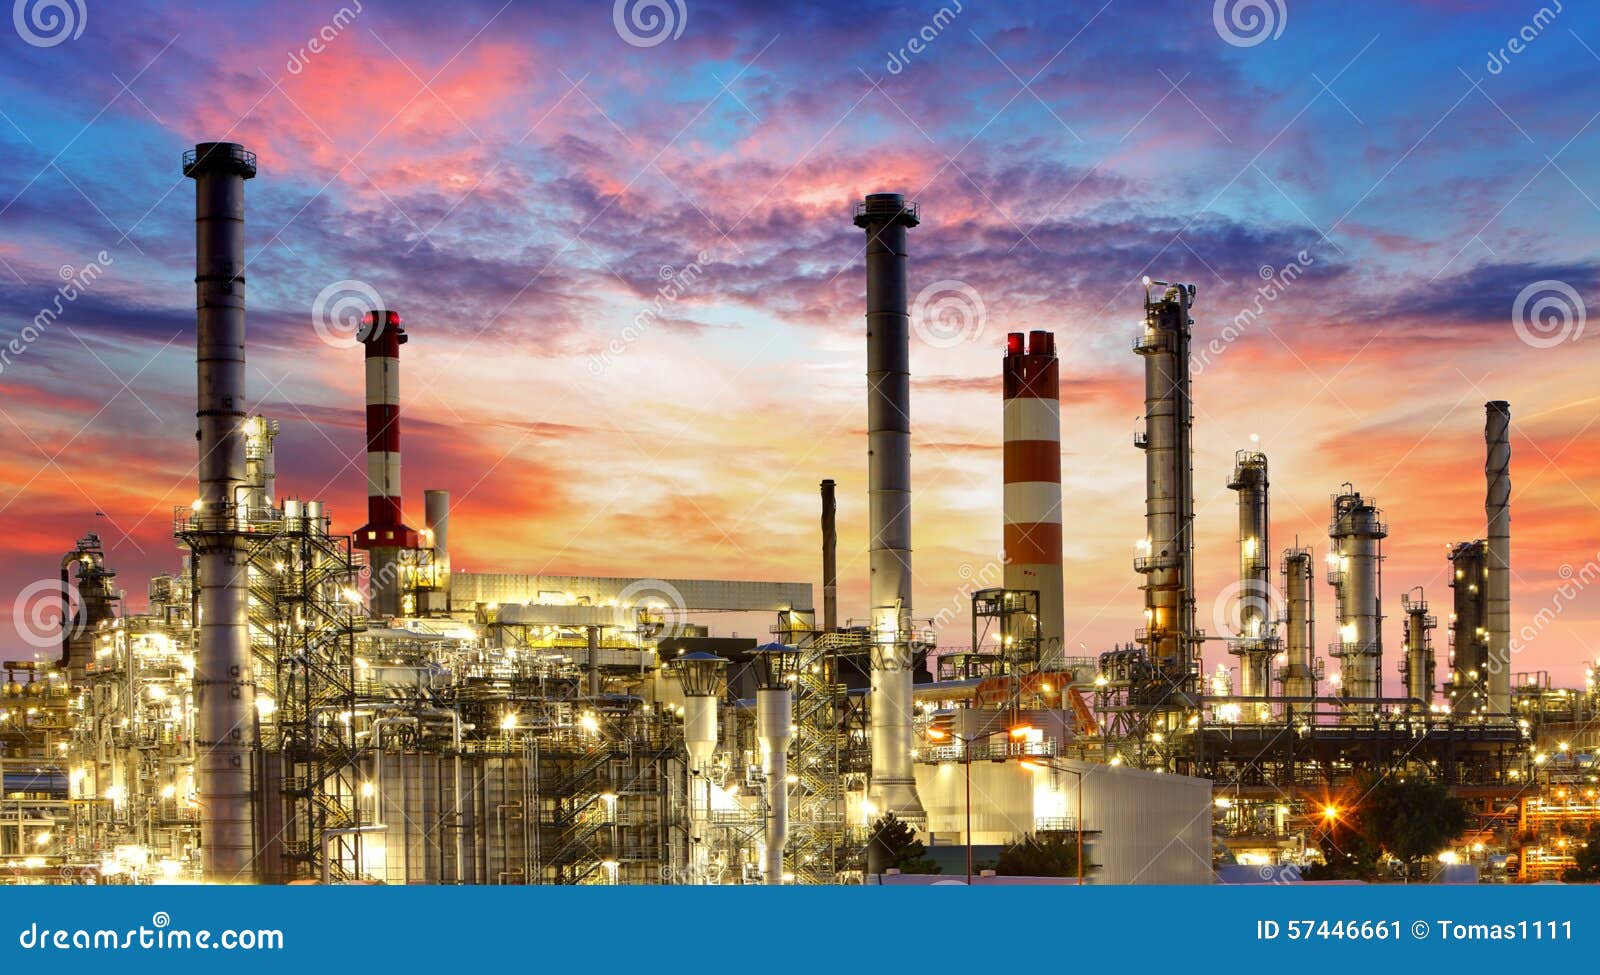 oil and gas industry - refinery, factory, petrochemical plant